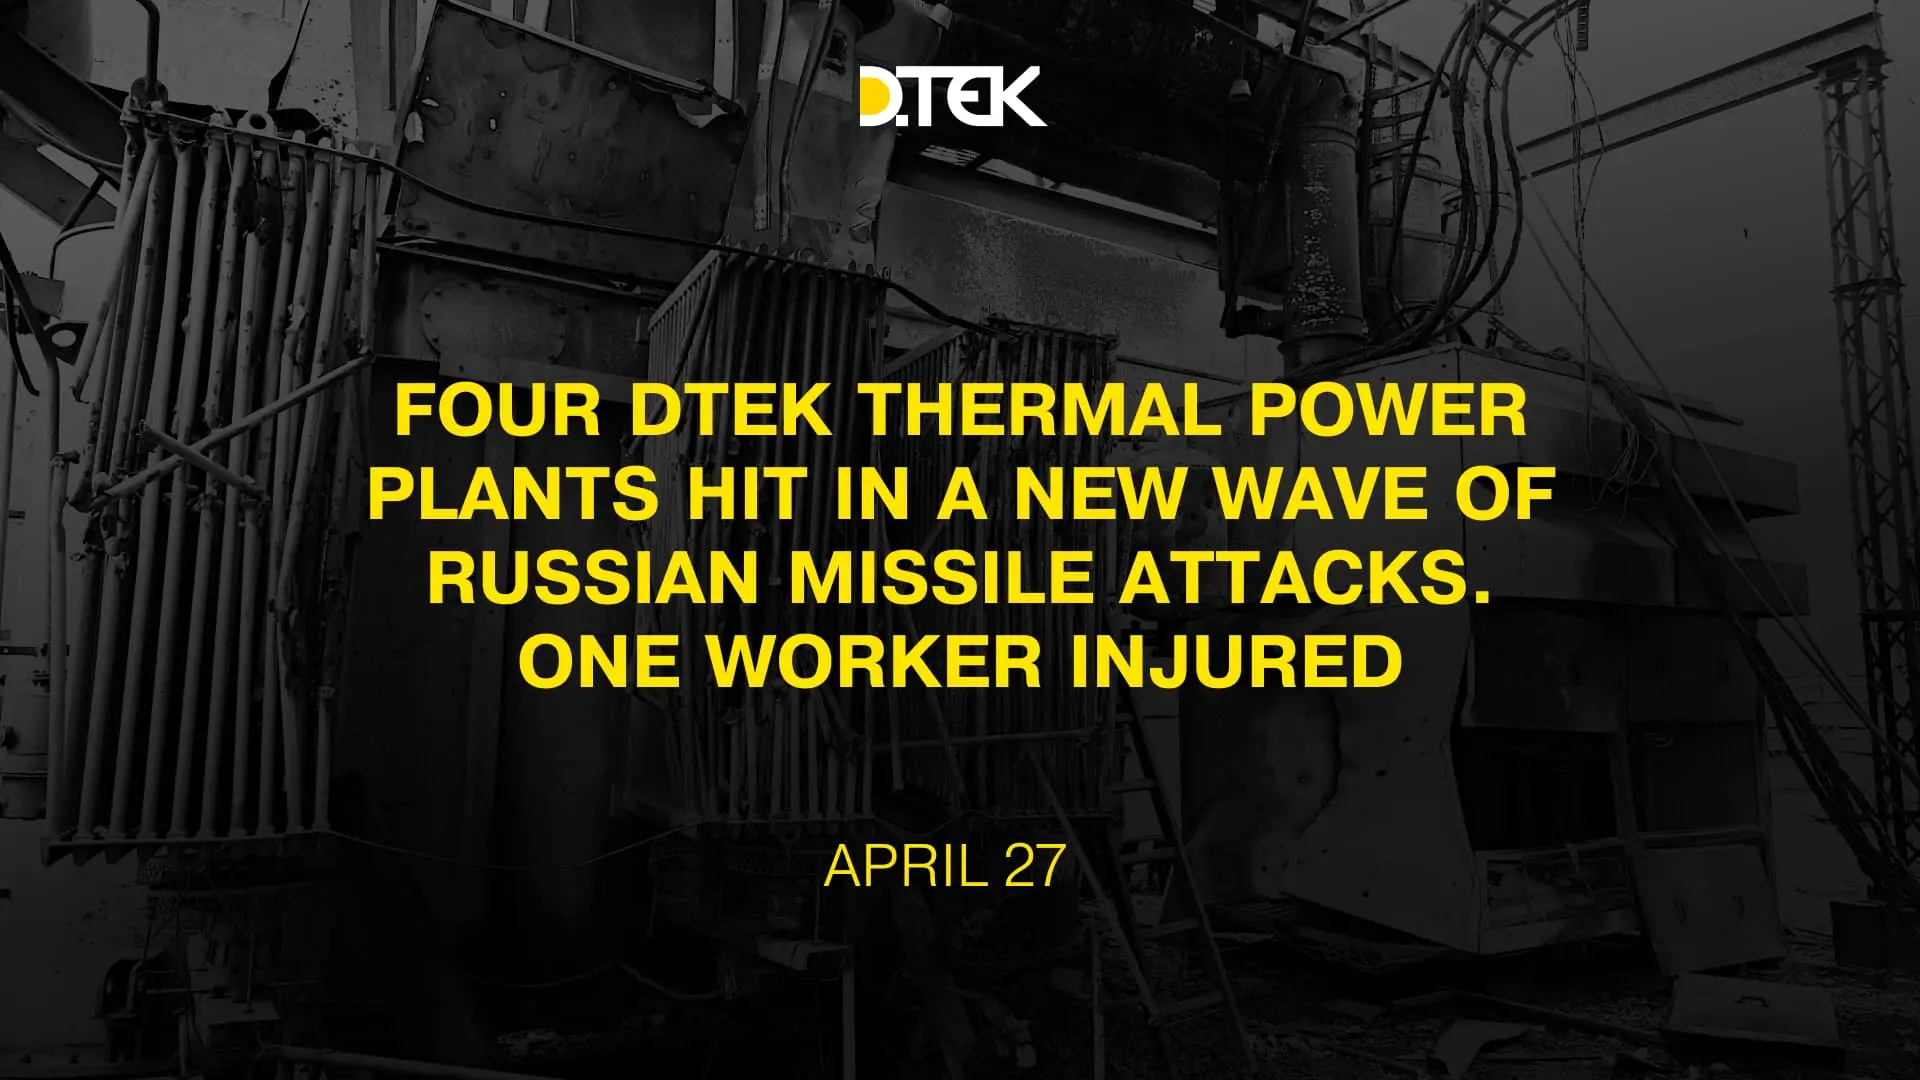 Four DTEK thermal power plants hit in a new wave of russian missile attacks. One worker injured